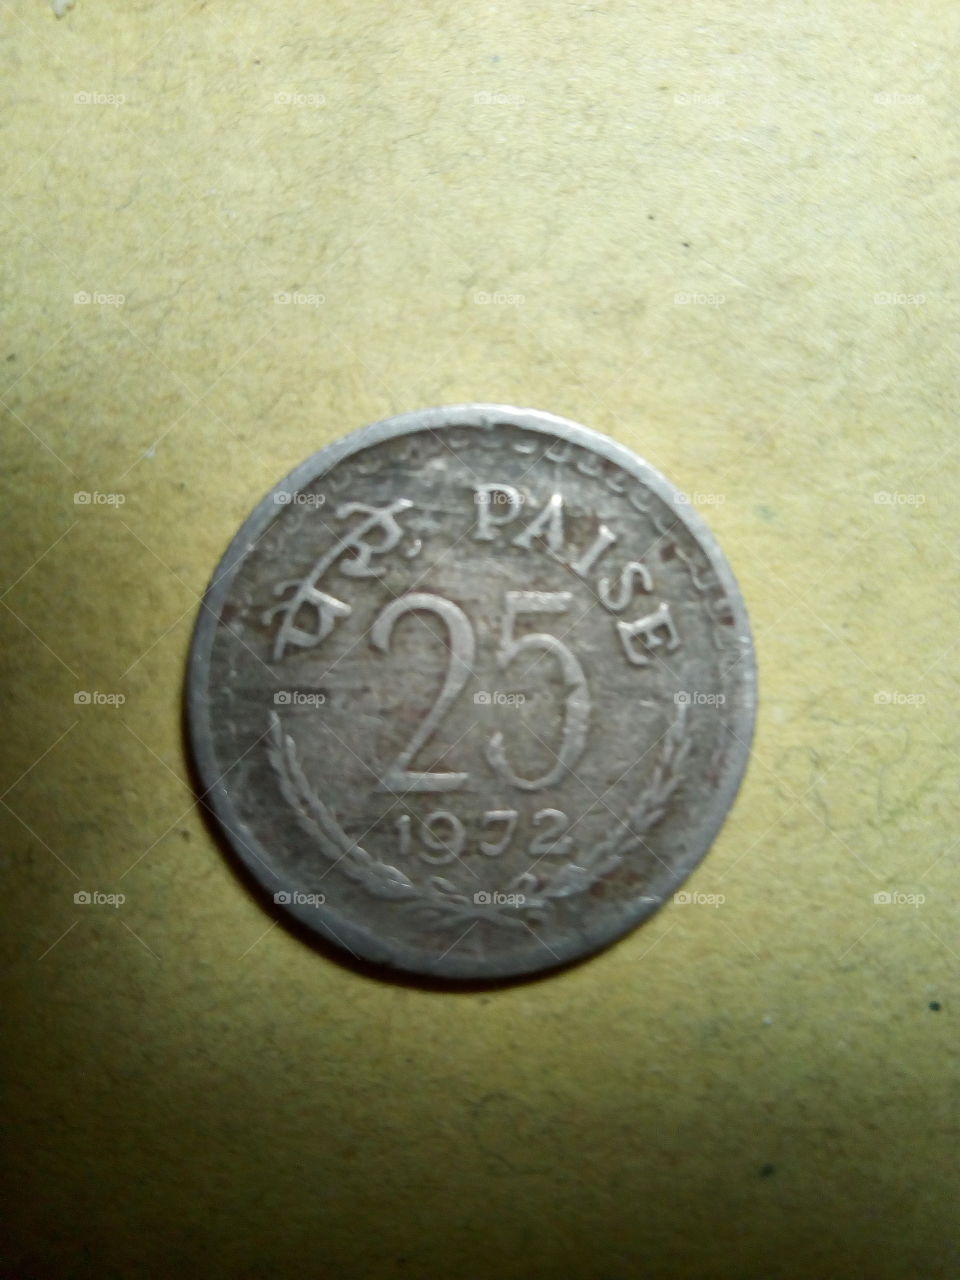 A coin of twenty five paise- 1/4 share of Indian Rupee issued by Government of India in 1972.